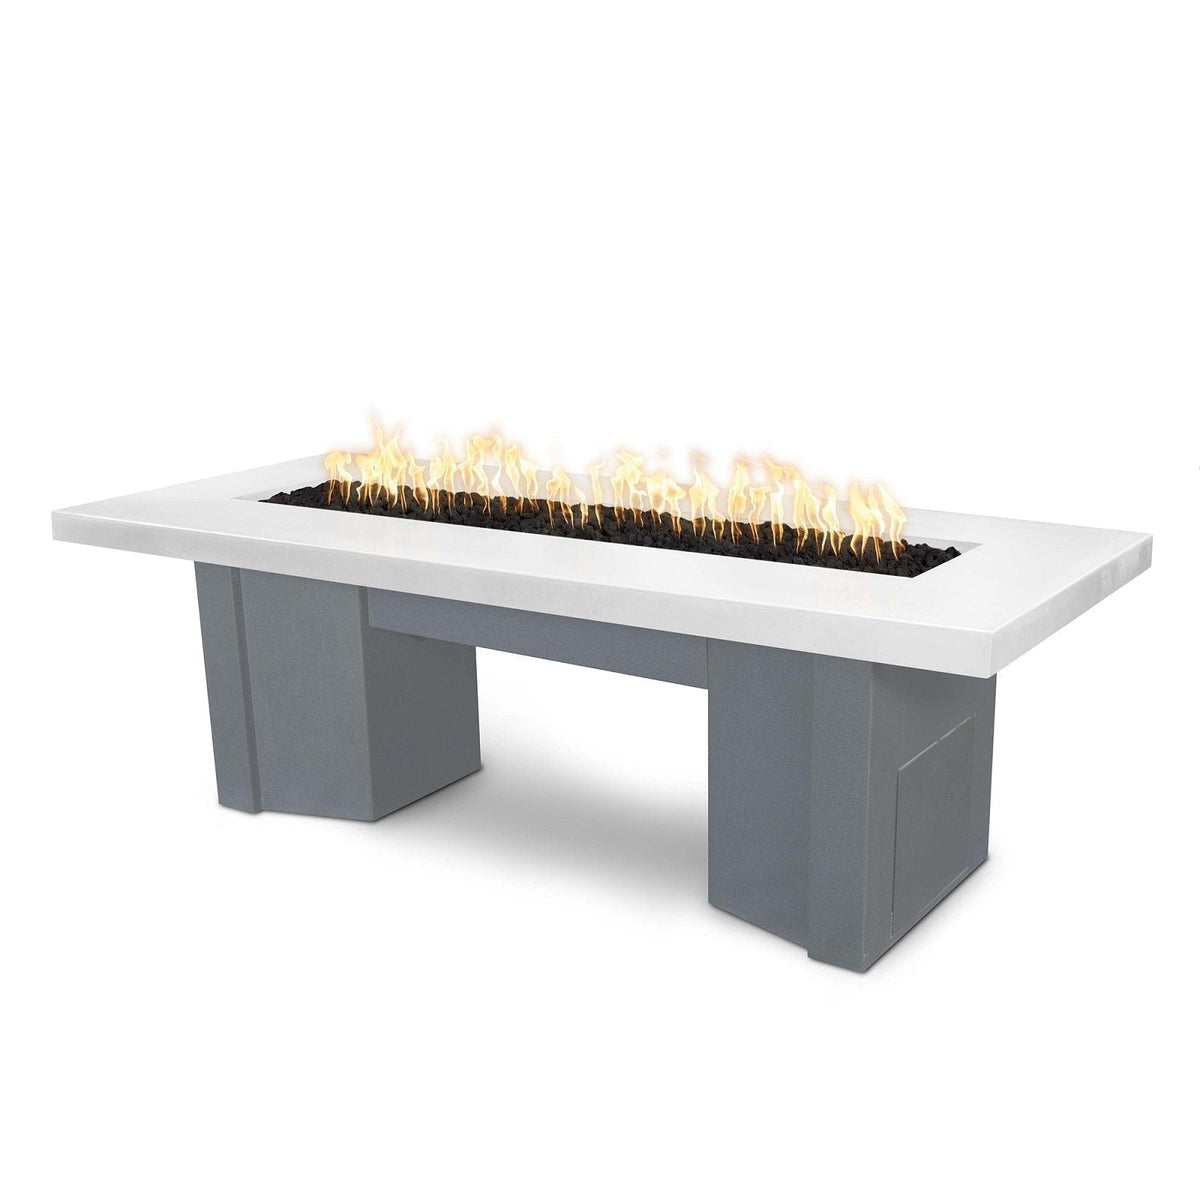 The Outdoor Plus Fire Features Limestone (-LIM) / Gray Powder Coated Steel (-GRY) The Outdoor Plus 78&quot; Alameda Fire Table Smooth Concrete in Natural Gas - Match Lit with Flame Sense System / OPT-ALMGFRC78FSML-NG